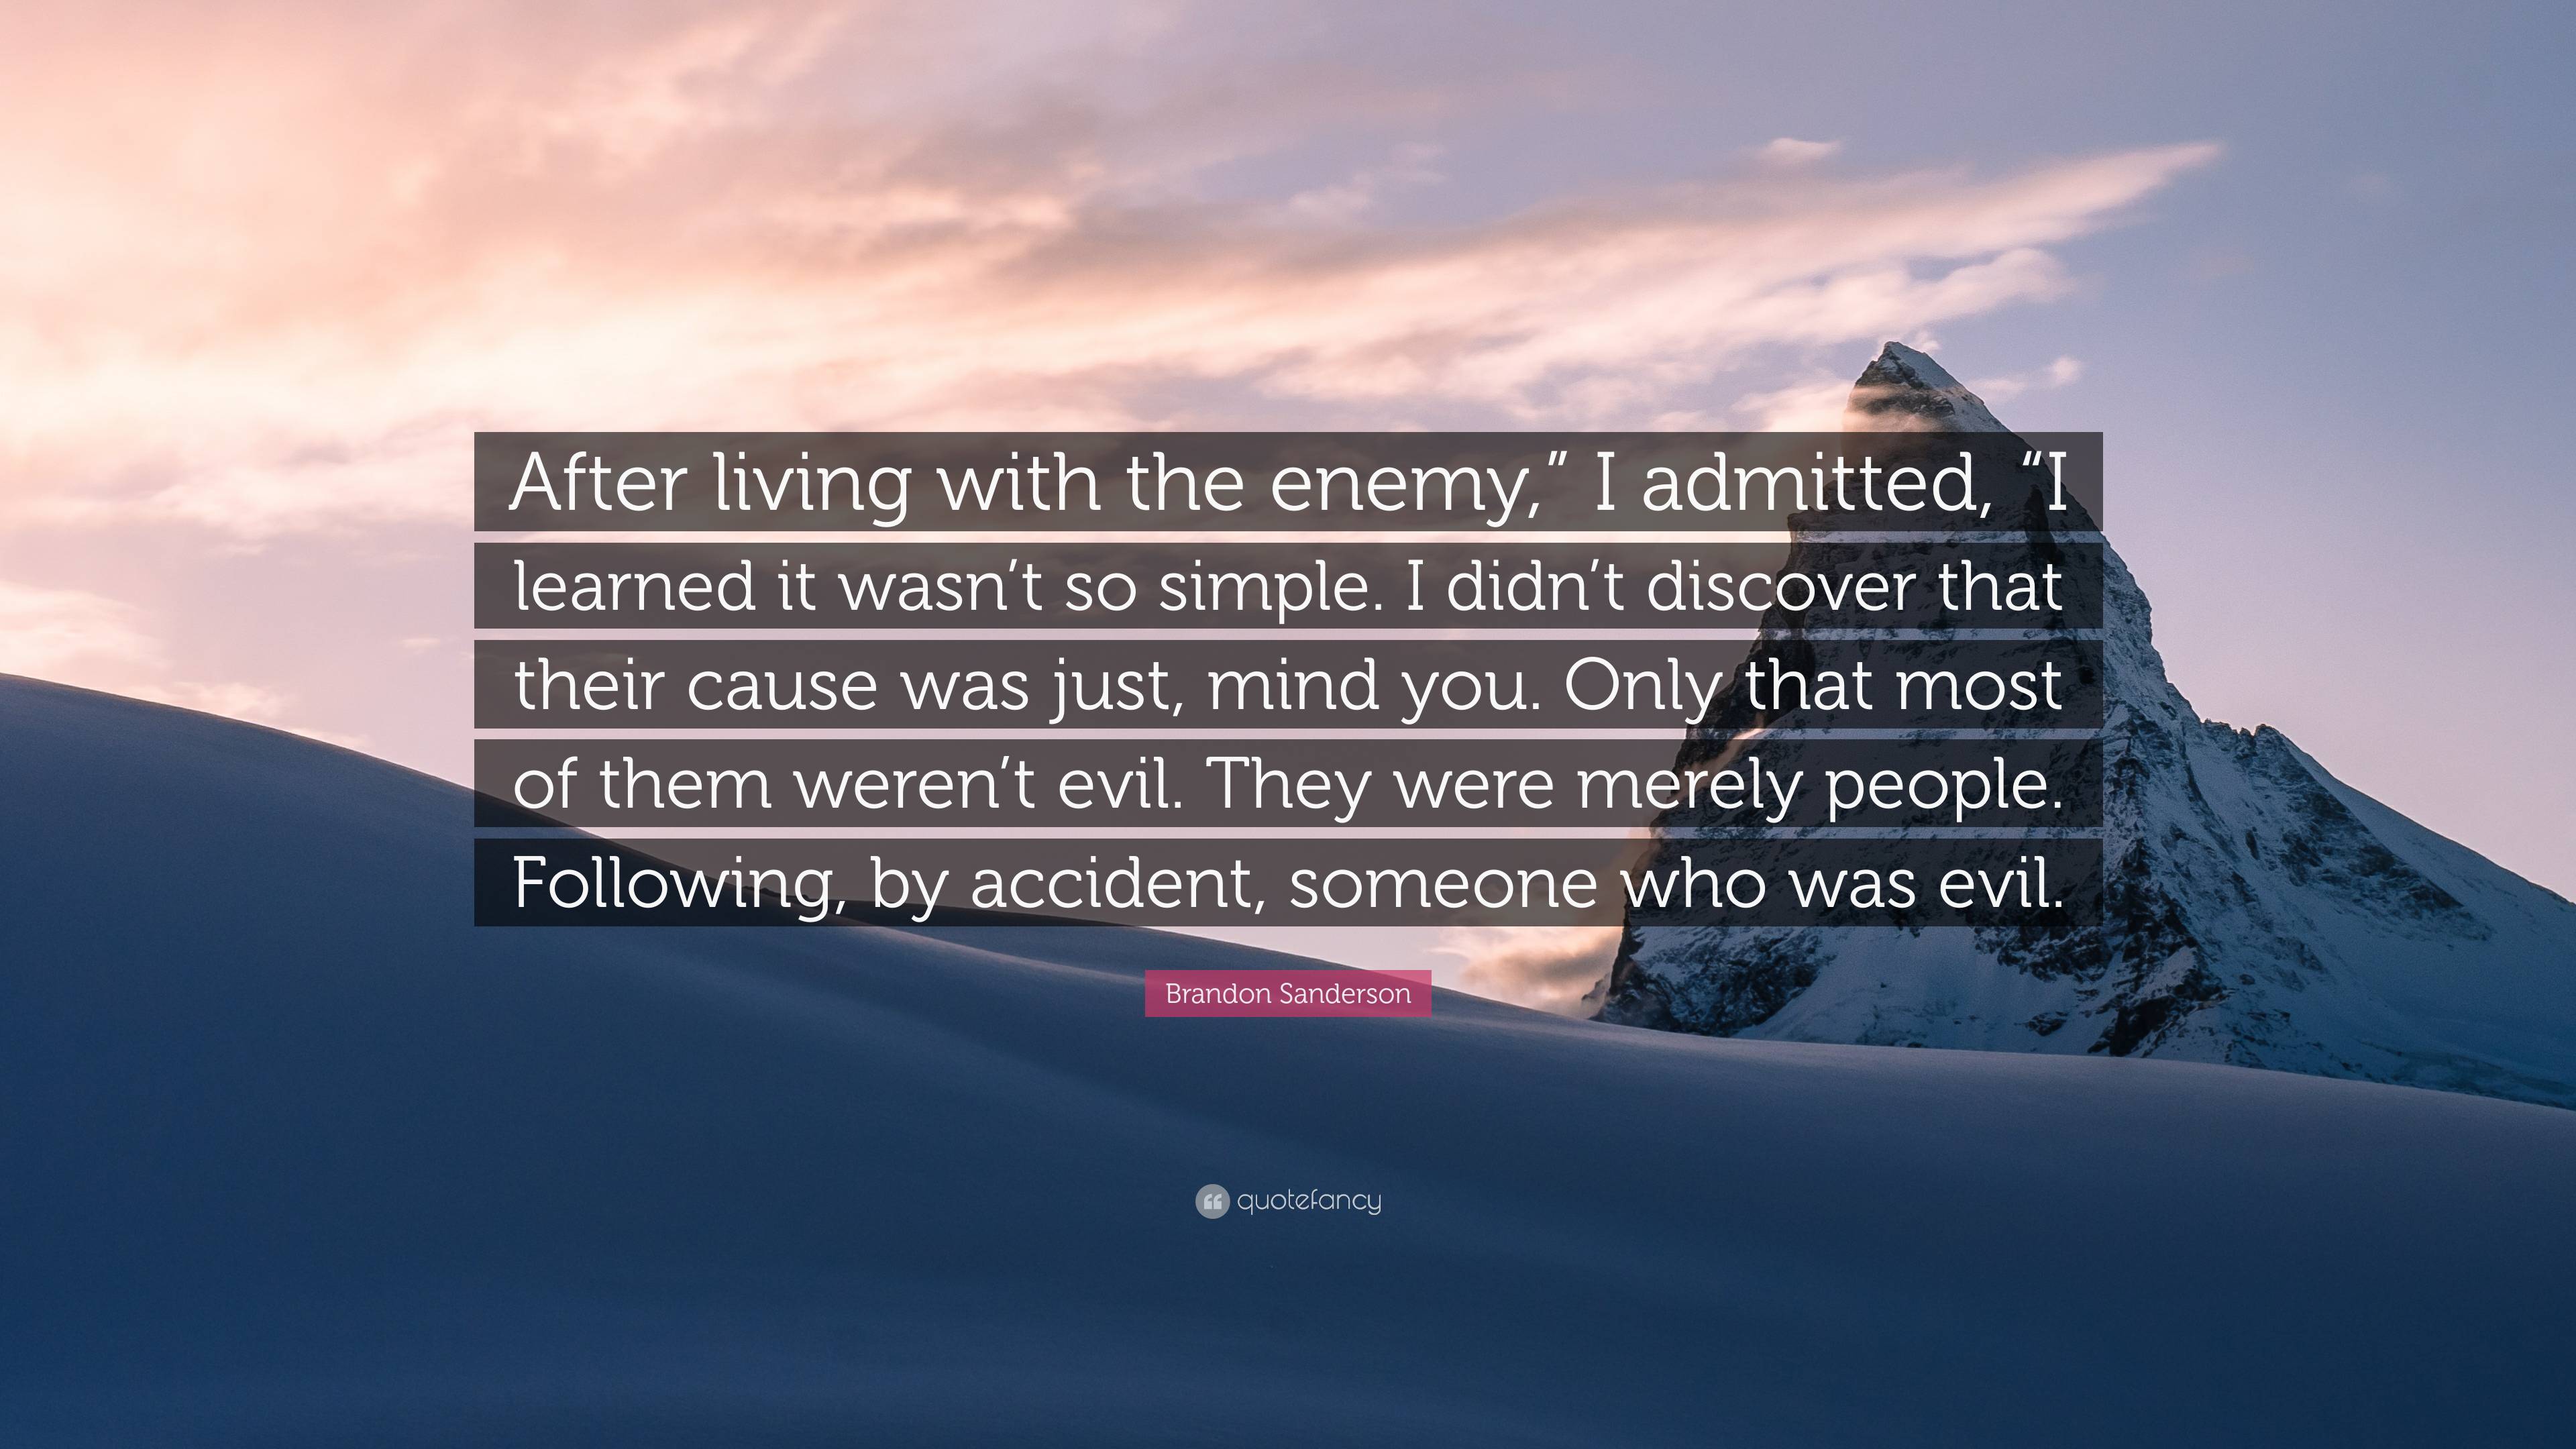 https://quotefancy.com/media/wallpaper/3840x2160/7311470-Brandon-Sanderson-Quote-After-living-with-the-enemy-I-admitted-I.jpg